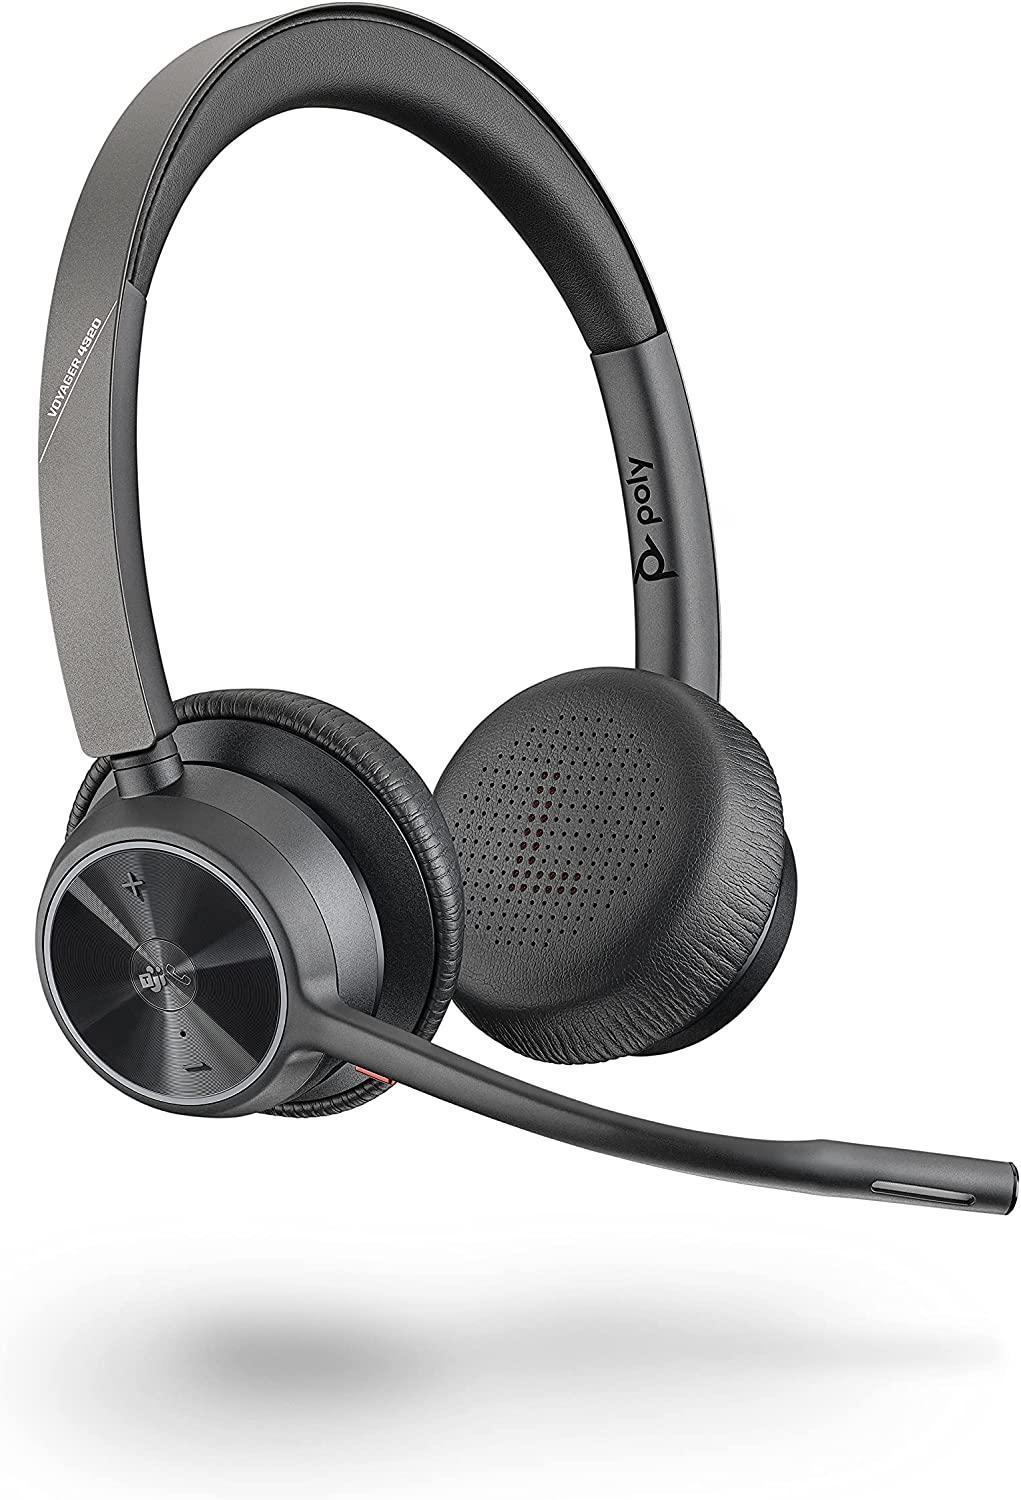 Poly - Voyager 4320 UC Wireless Headset (Plantronics) - Headphones with Boom Mic - Connect to PC/Mac via USB-A Bluetooth Adapter, Cell Phone via Bluetooth - Works with Teams (Certified), Zoom &amp; More